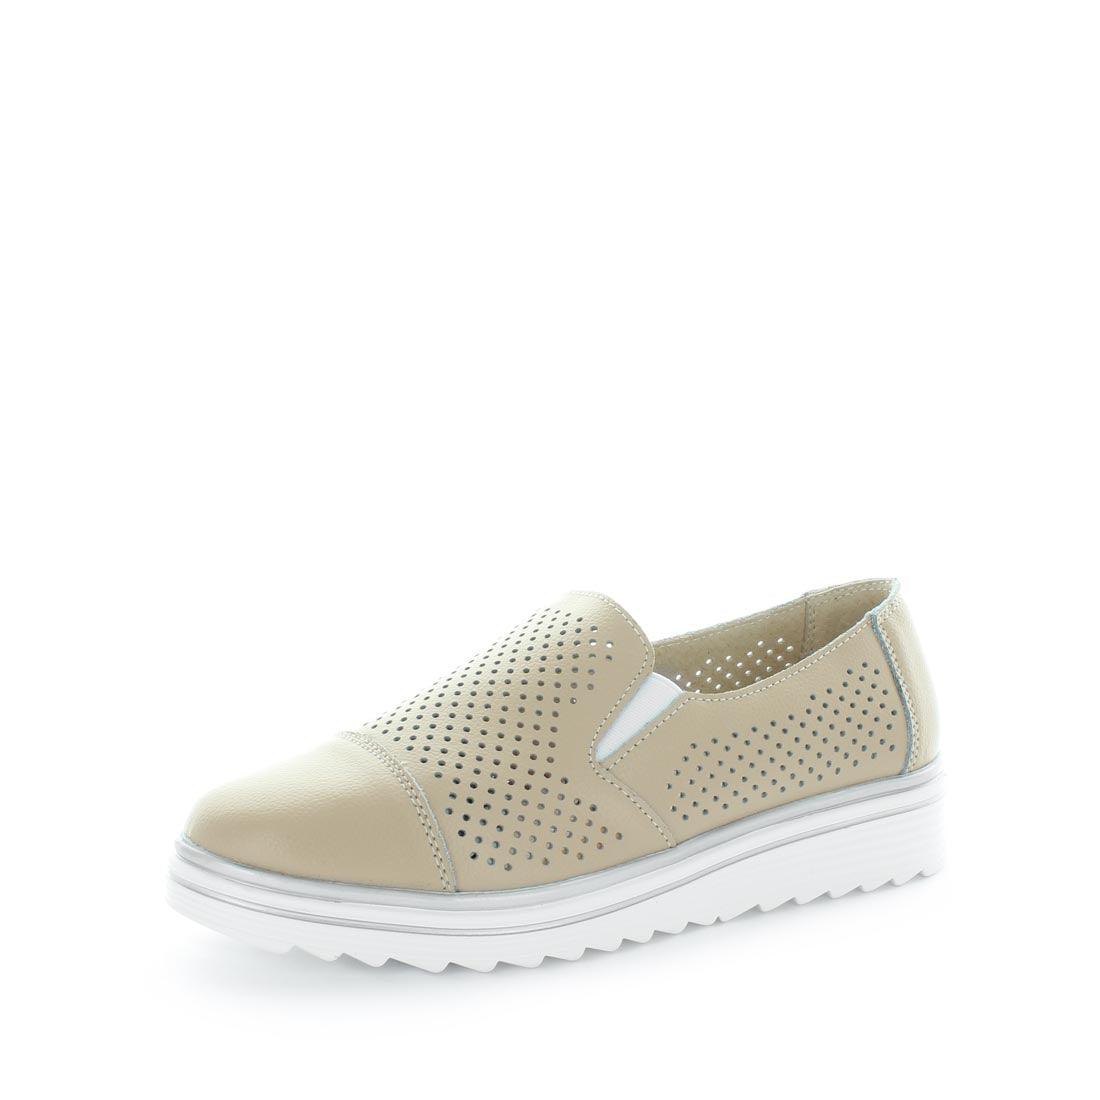 CRISTA (6538287153231) Just Bee comfort shoes - Crista by Just Bee - womens comfort shoes - flat slip-on style shoes with a laser cut upper and slight flatform wedge all wrapped in leather construction